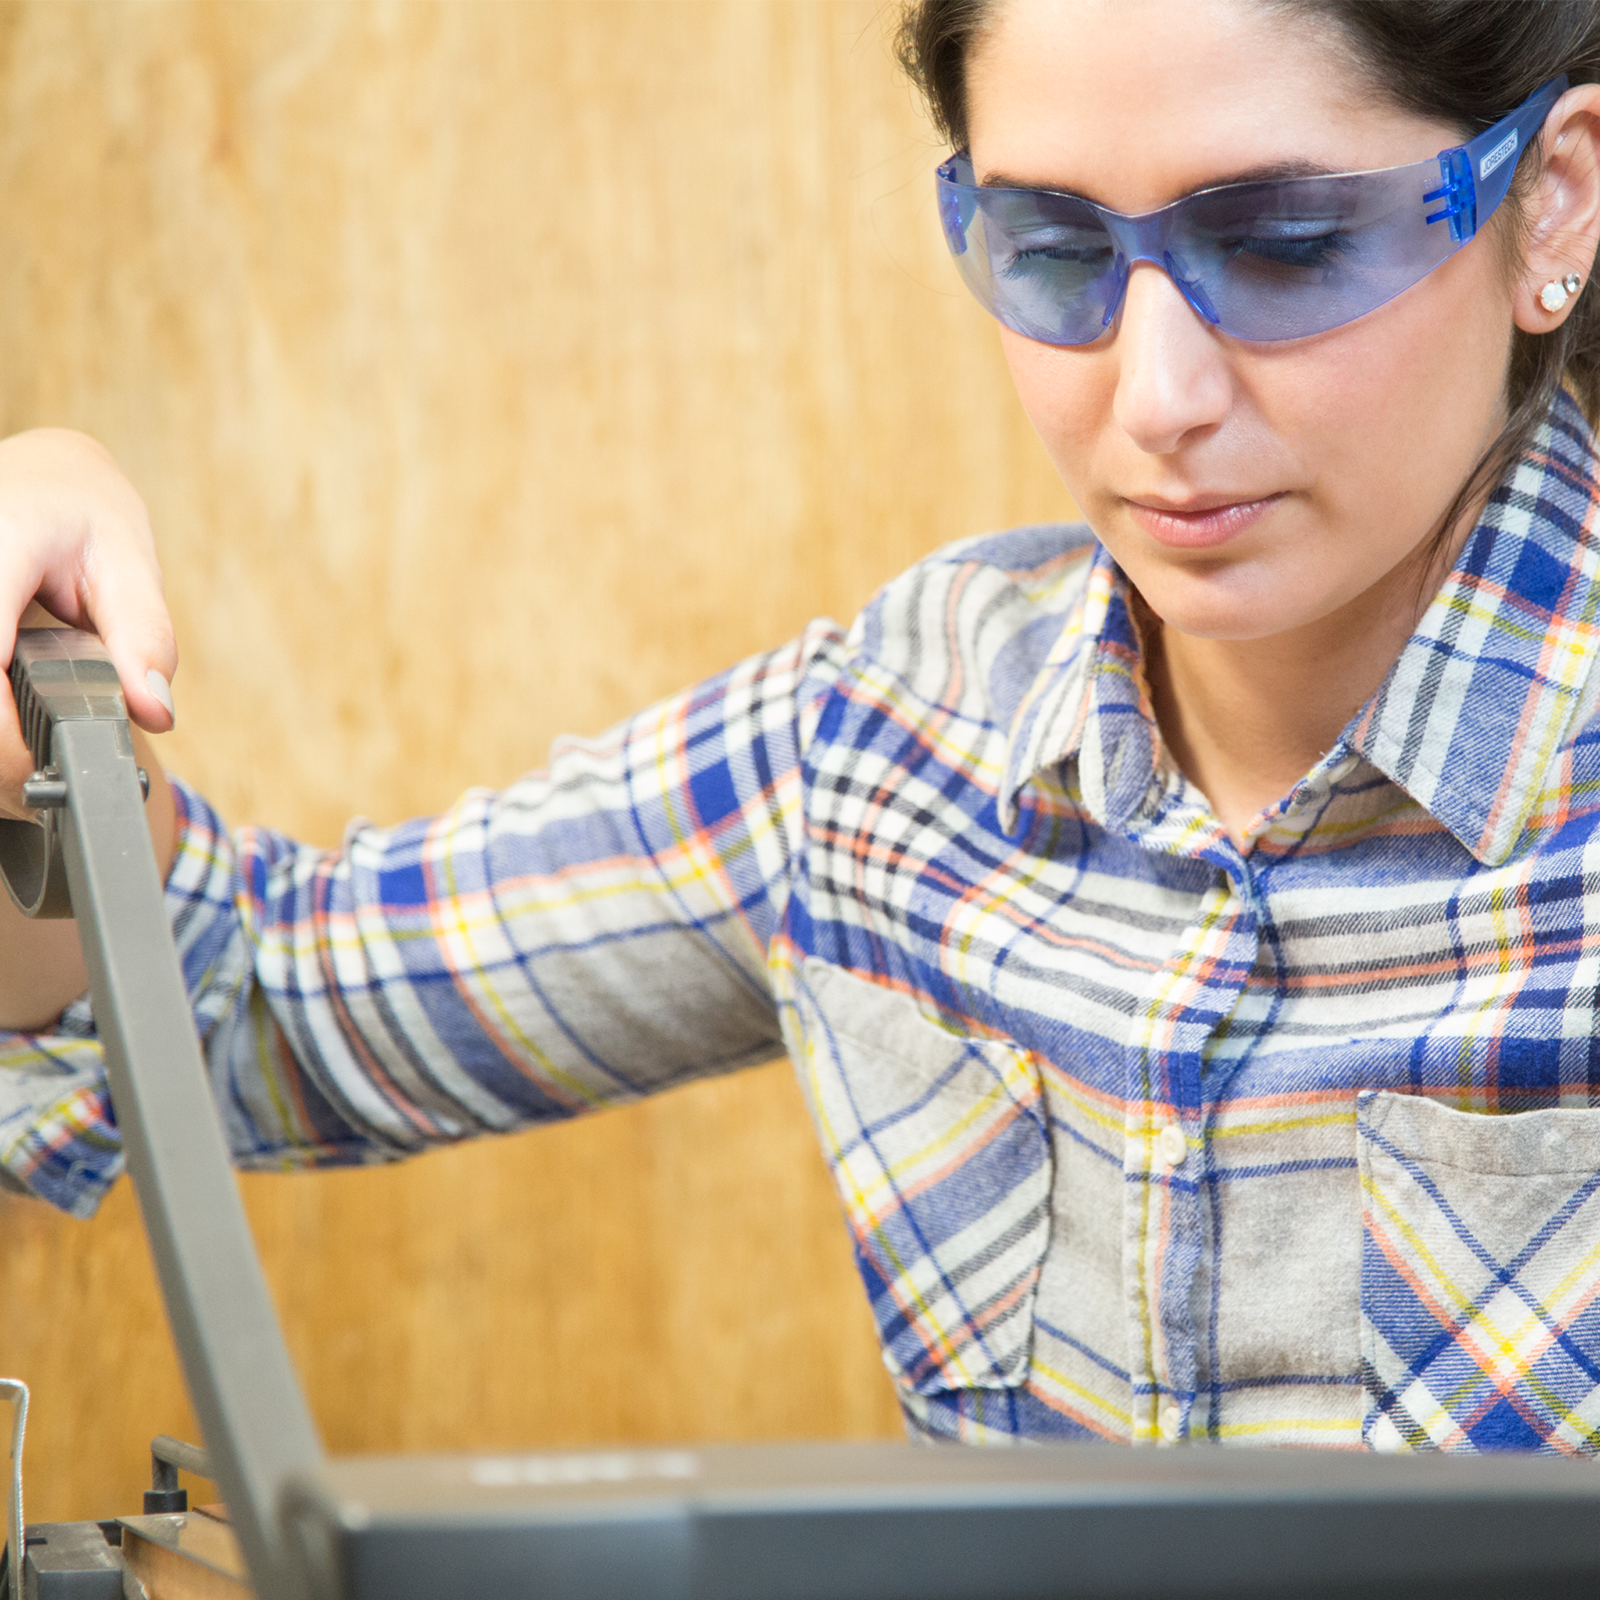 A woman wearing the all blue JORESTECH safety glasses with uv protection for high impact protection ANSI compliant while doing a DUI project in her workshop